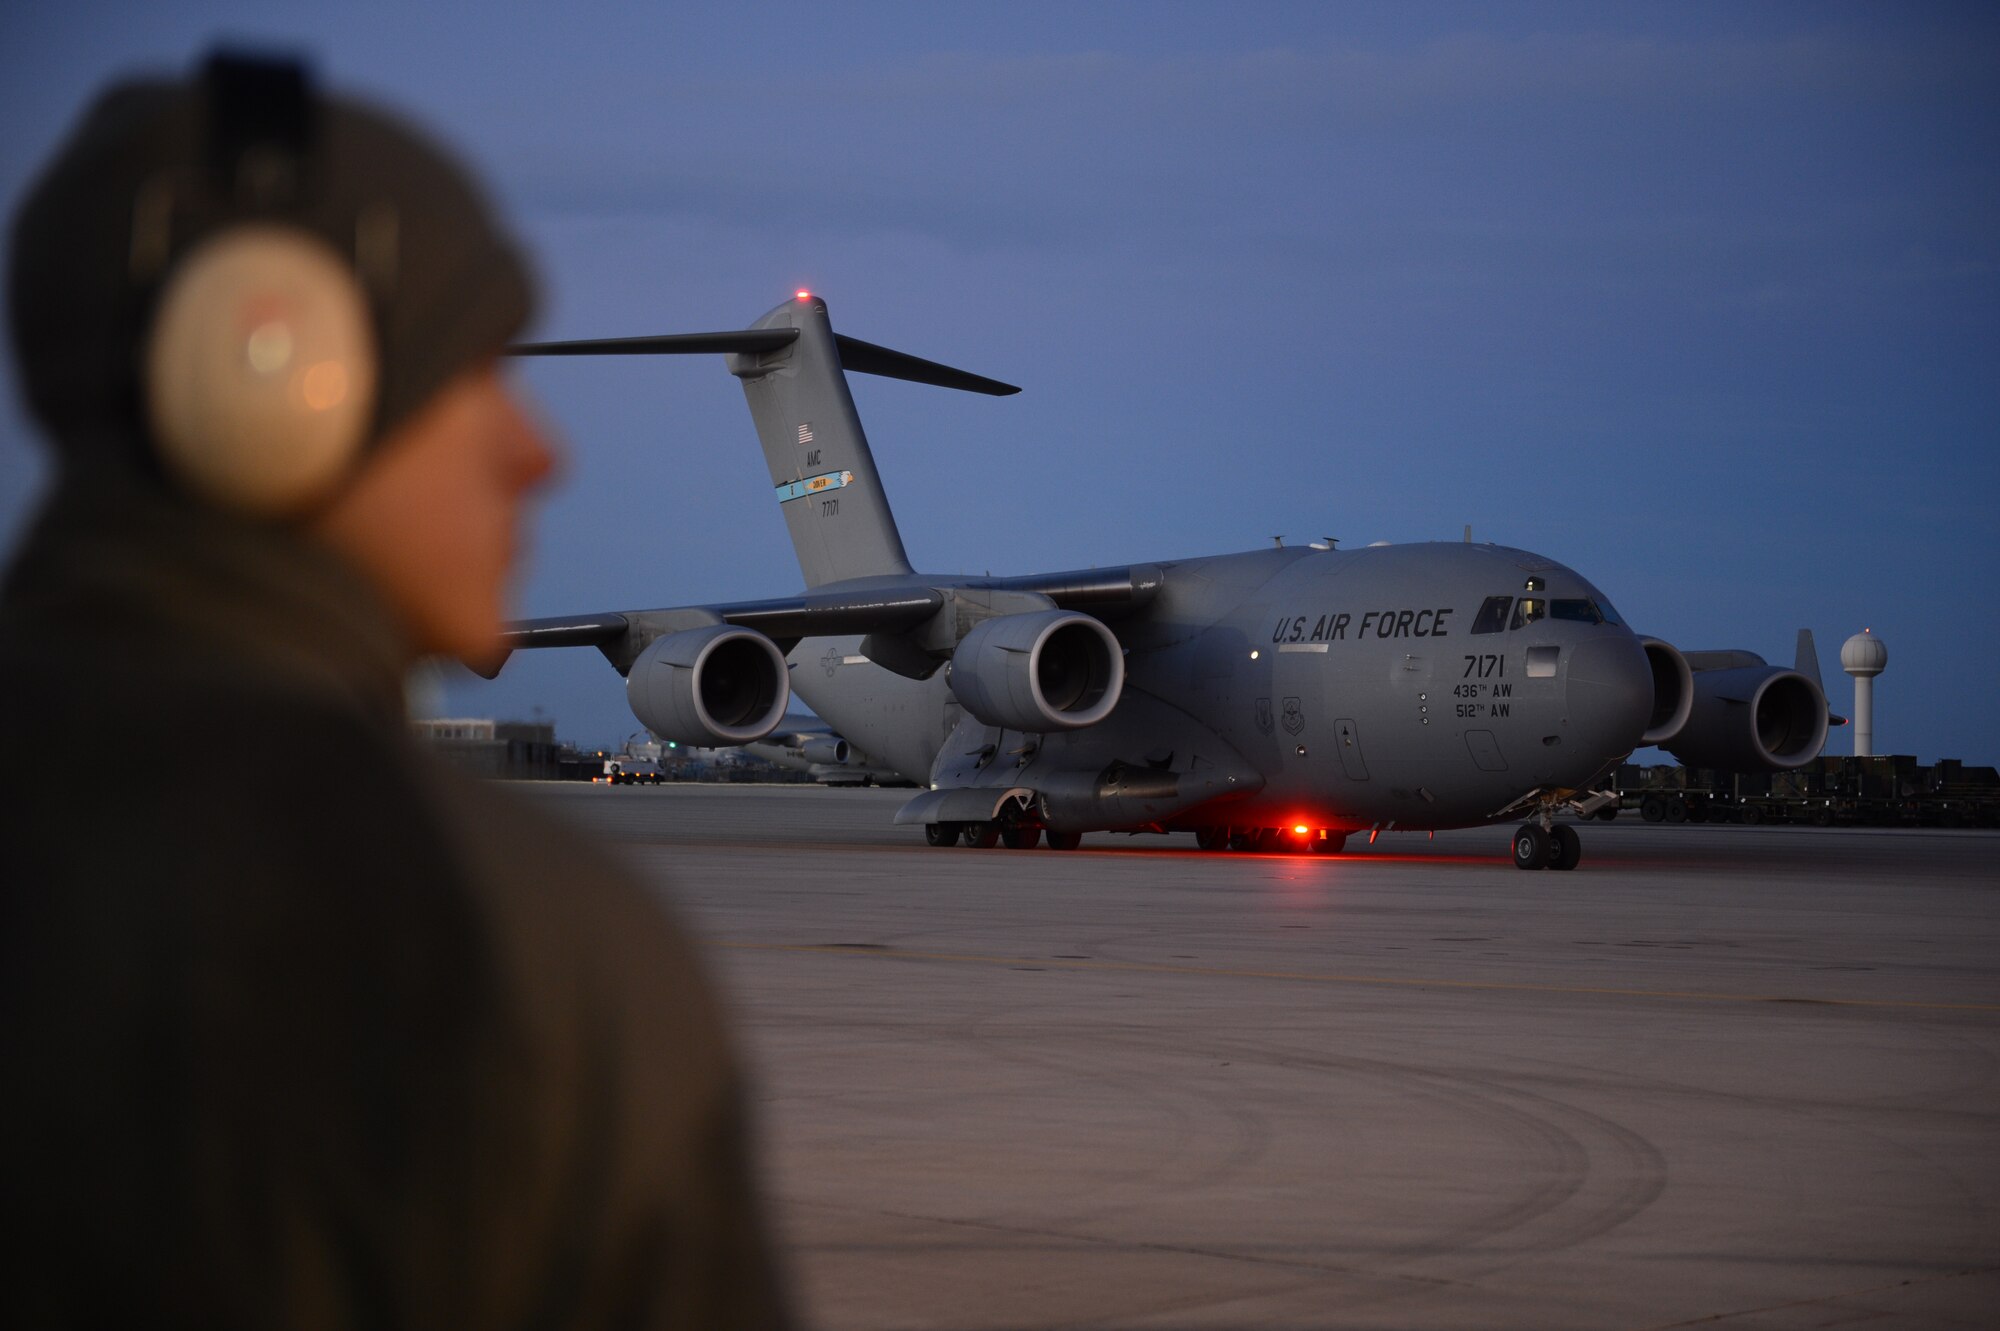 ISTRES, France – A U.S. Airman from the 621st Contingency Response Wing looks on as a U.S. Air Force C-17 Globemaster III cargo aircraft taxis onto a loading ramp in Istres, France, Jan. 22, 2013. The U.S. pledged support to the French military for their operations in Mali, and provided C-17s and Airmen for logistical support. (U.S. Air Force photo by Staff Sgt. Nathanael Callon/Released)